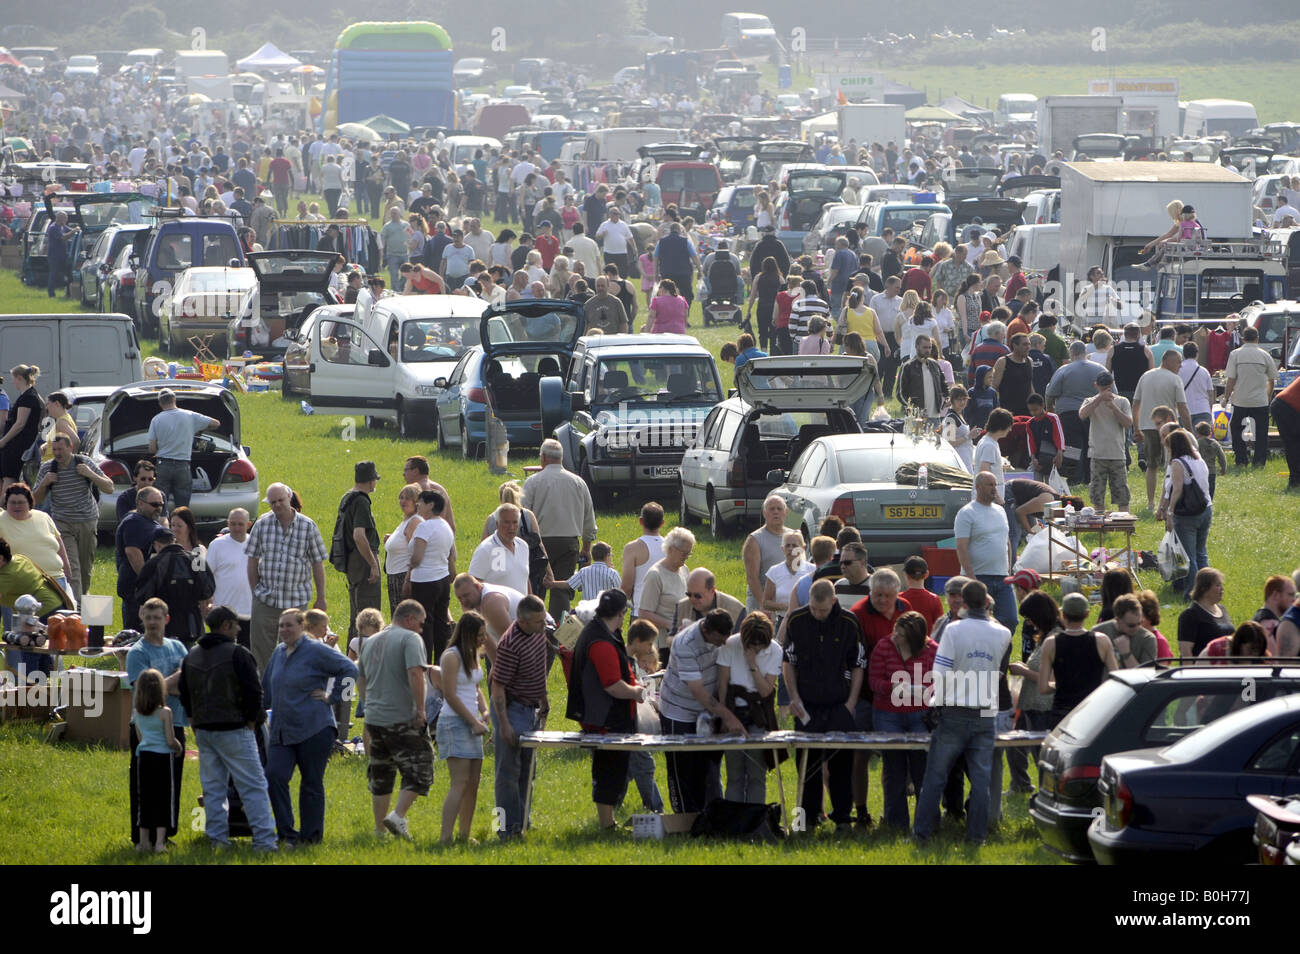 CROWDS AT A CAR BOOT SALE IN STAFFORDSHIRE,ENGLAND,UK. Stock Photo